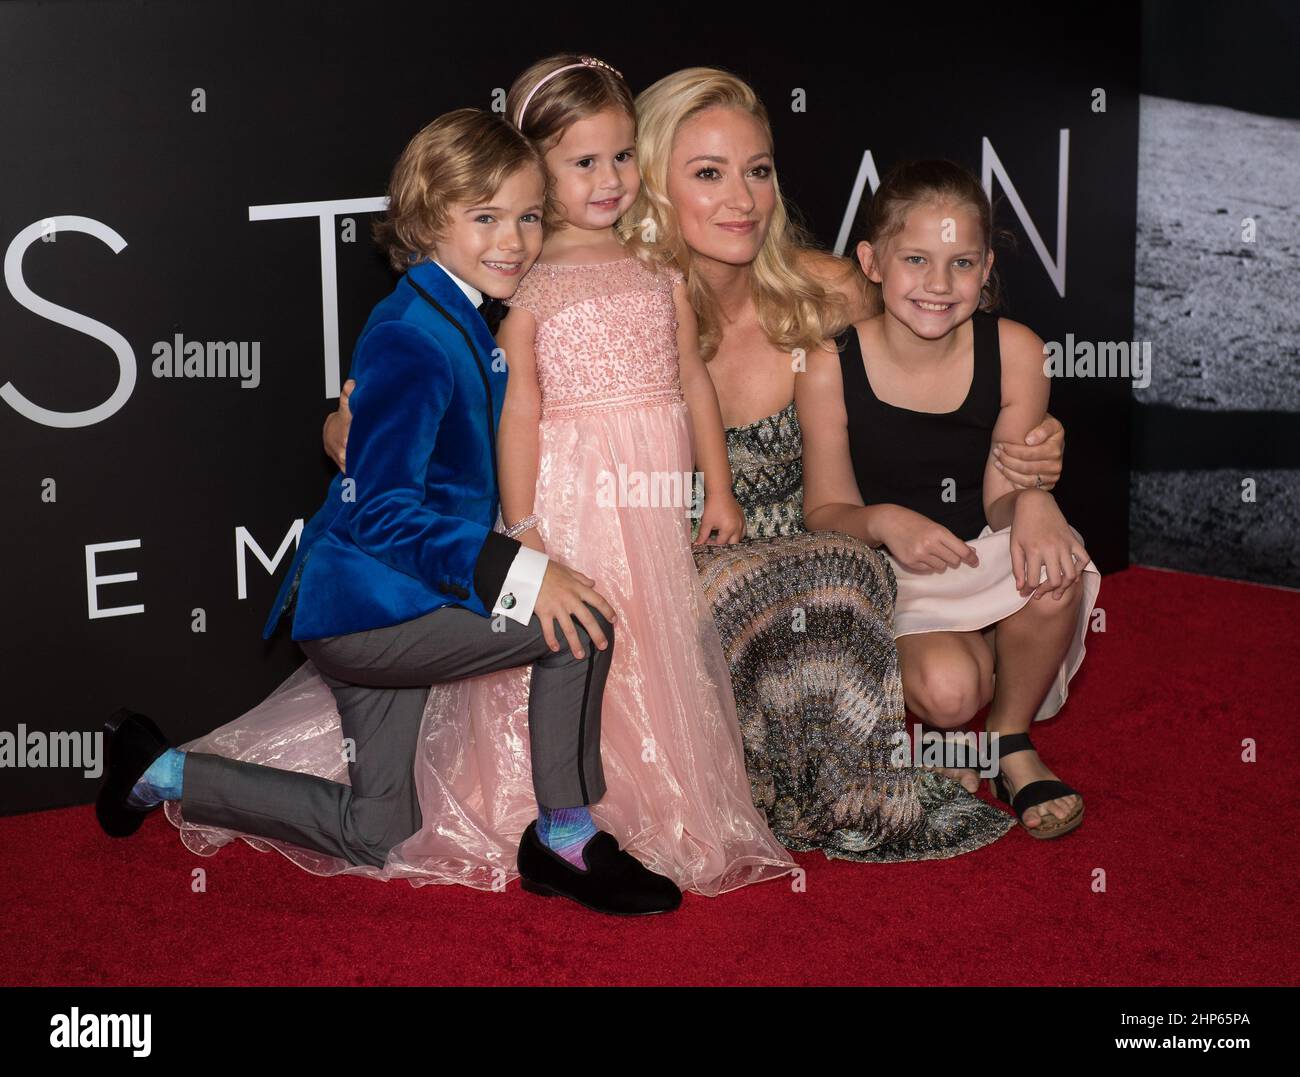 From left to right, American actor Gavin Warren, American actress Lucy Brooke Stafford, American actress Olivia Hamilton, and American actress Claire Smith arrive on the red carpet for the premiere of the film 'First Man' at the Smithsonian National Air and Space Museum Thursday, Oct. 4, 2018 in Washington. Stock Photo